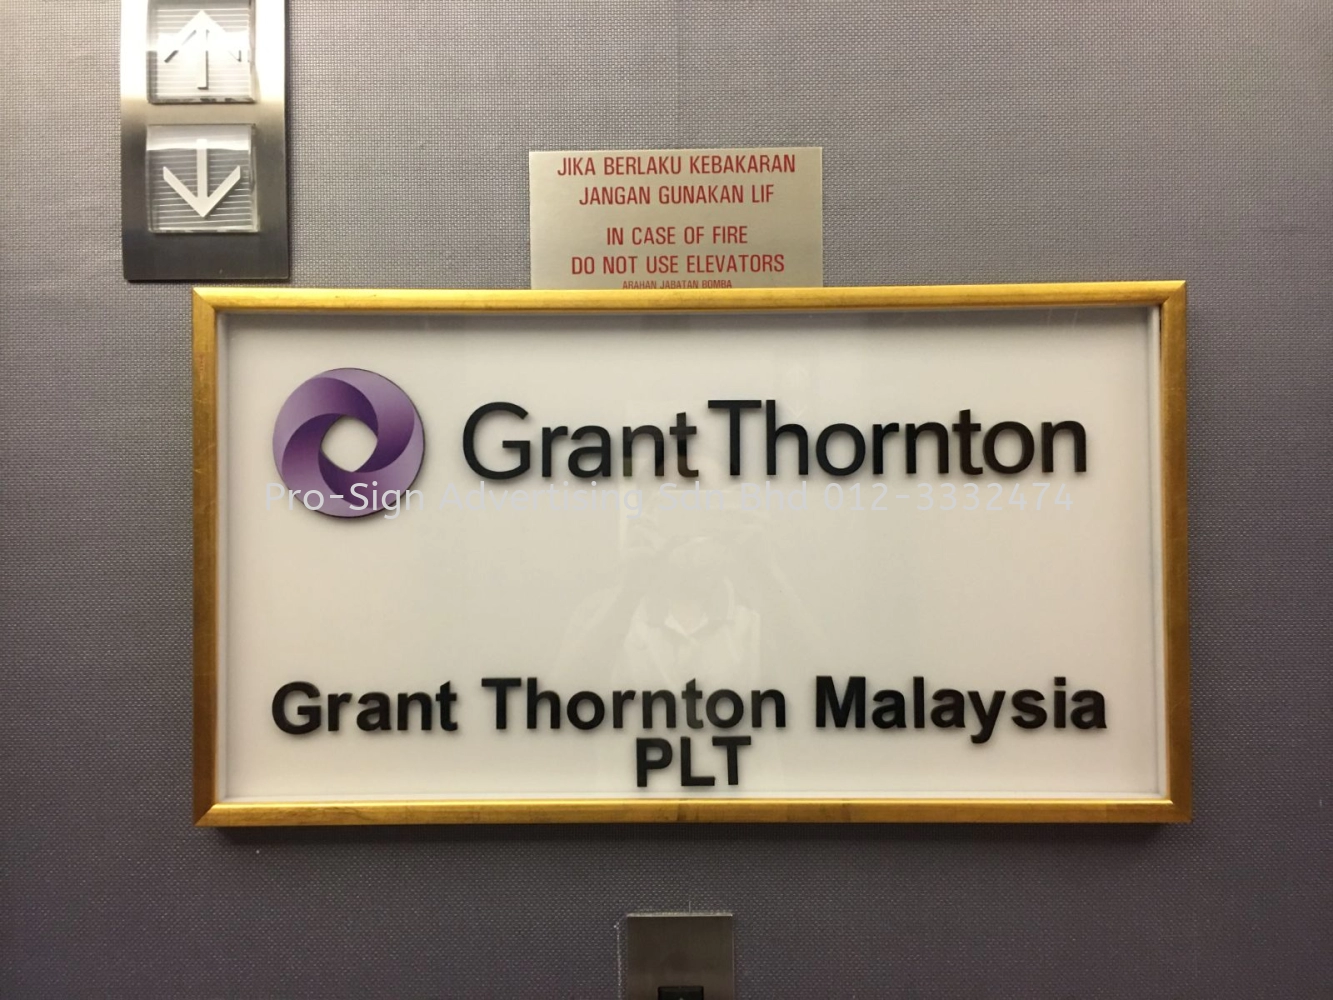 ACRYLIC CUT OUT LETTERING (GRAND THORNTON, 2021, KL)